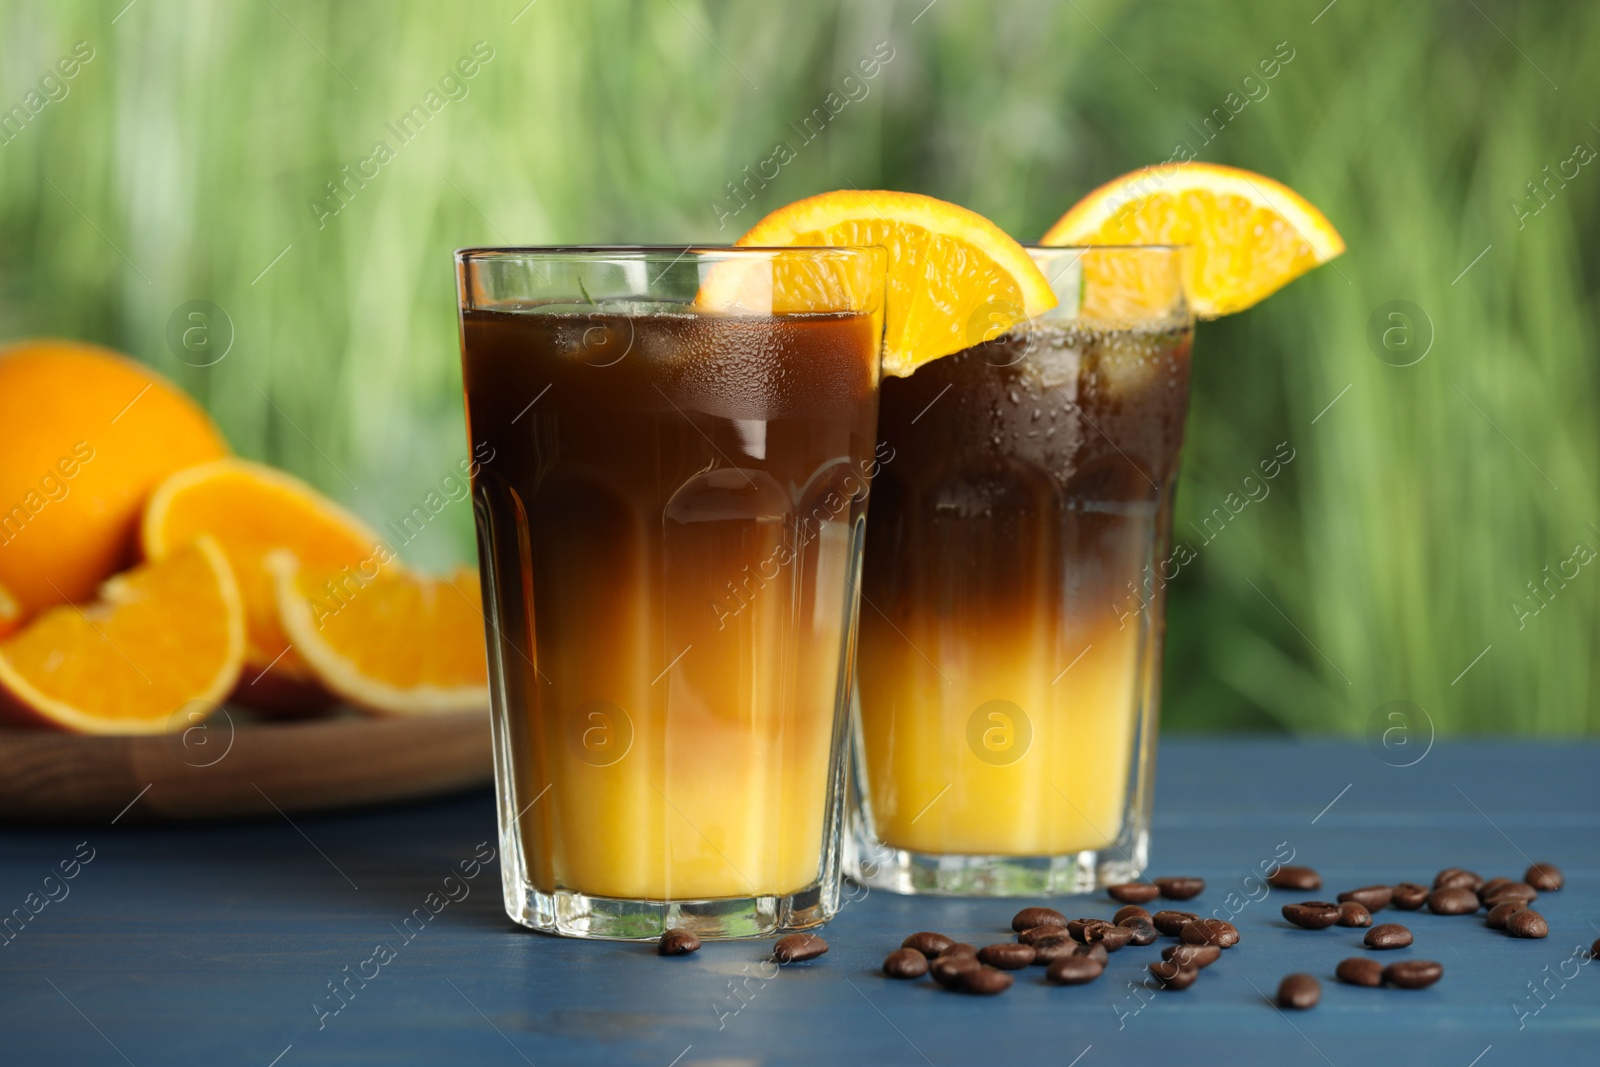 Photo of Tasty refreshing drink with coffee and orange juice on blue wooden table against blurred background